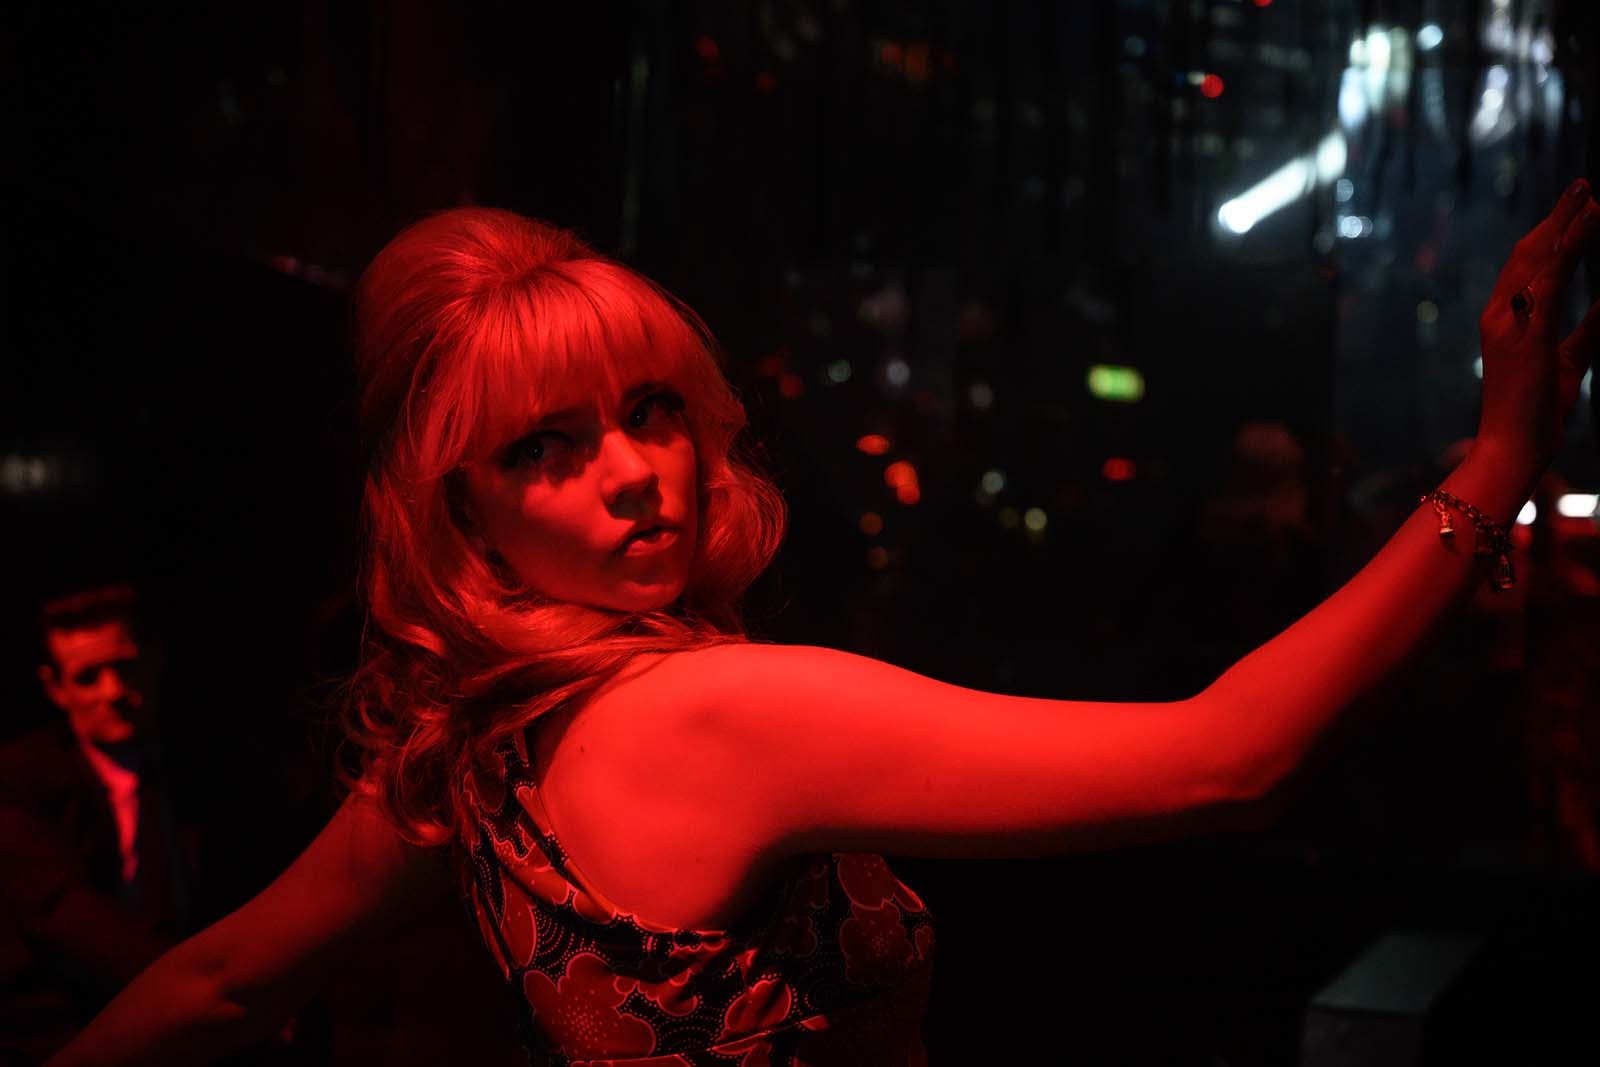 Red light district. Sandie dances as Jack watches in Last Night in Soho. Image © Focus Features